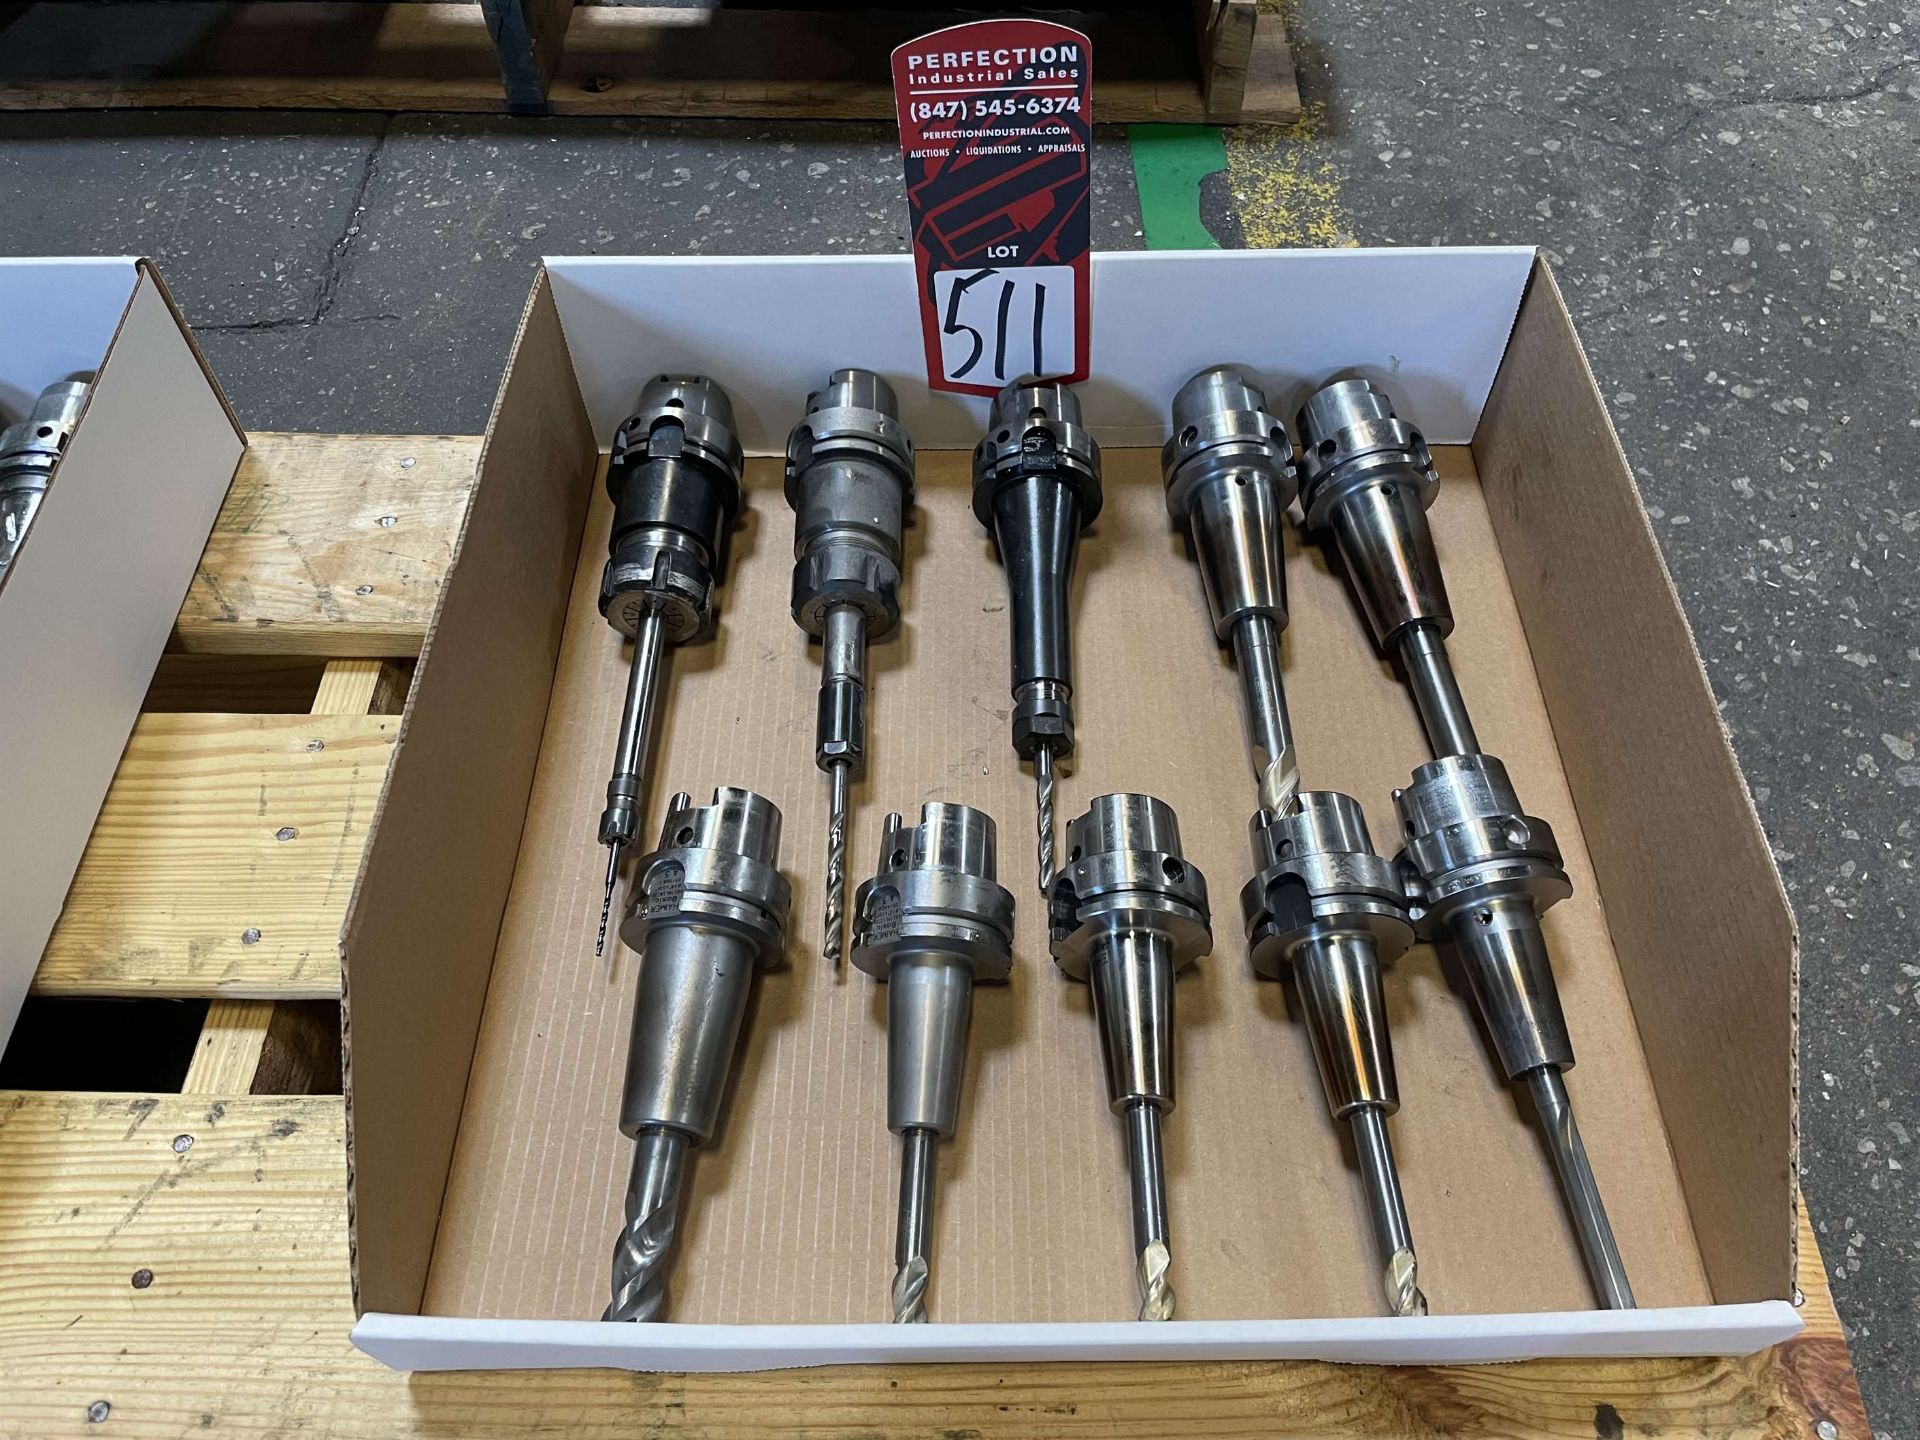 Lot of (10) HSK 63 Tool Holders (Located at 4200 West Harry St., Wichita, KS 67209)